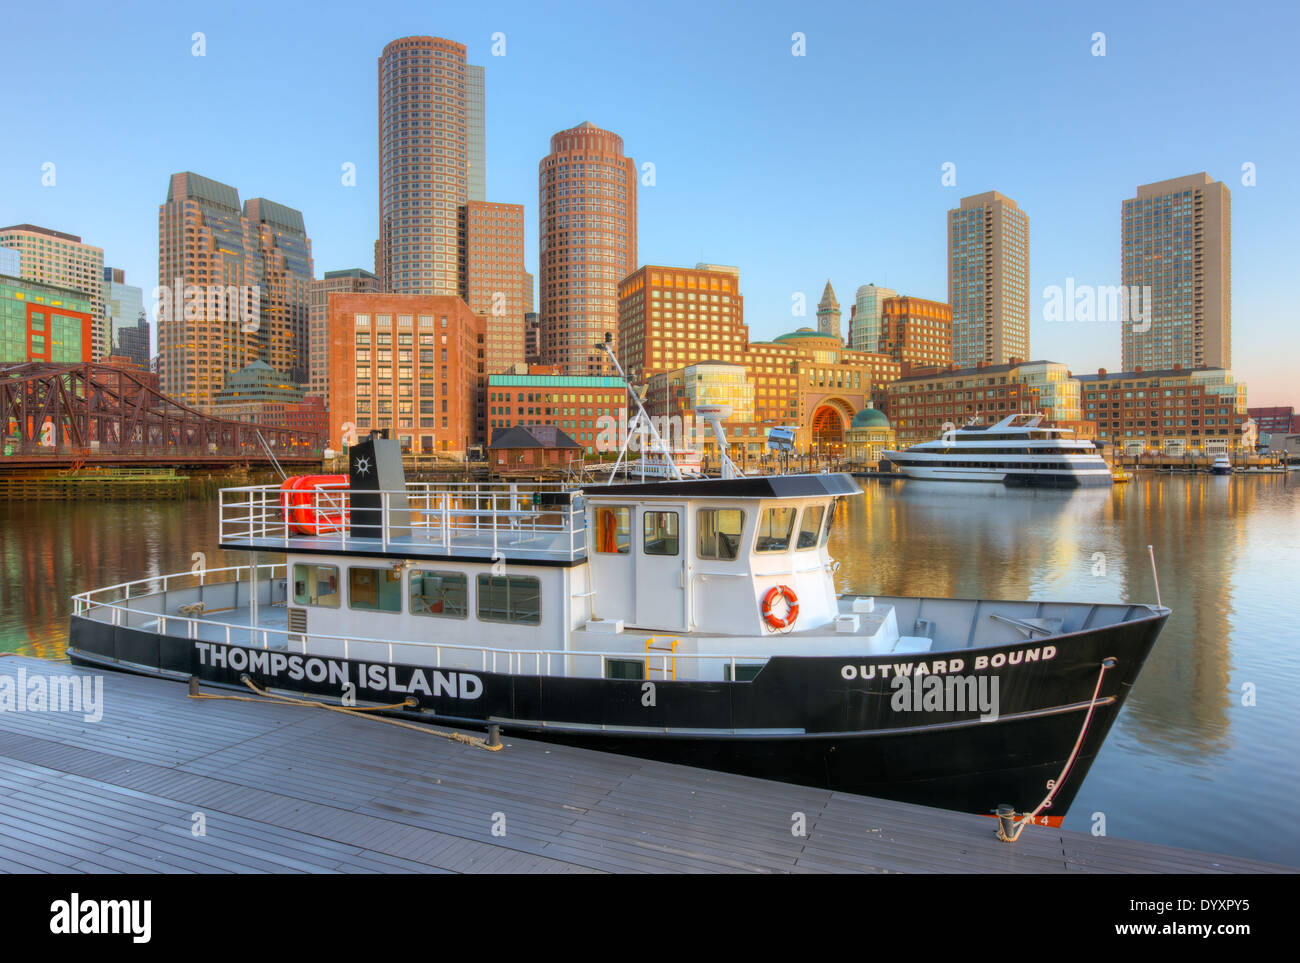 The Outward Bound Thompson Island Ferry sits docked in front of the skyline at sunrise in Boston, Massachusetts. Stock Photo